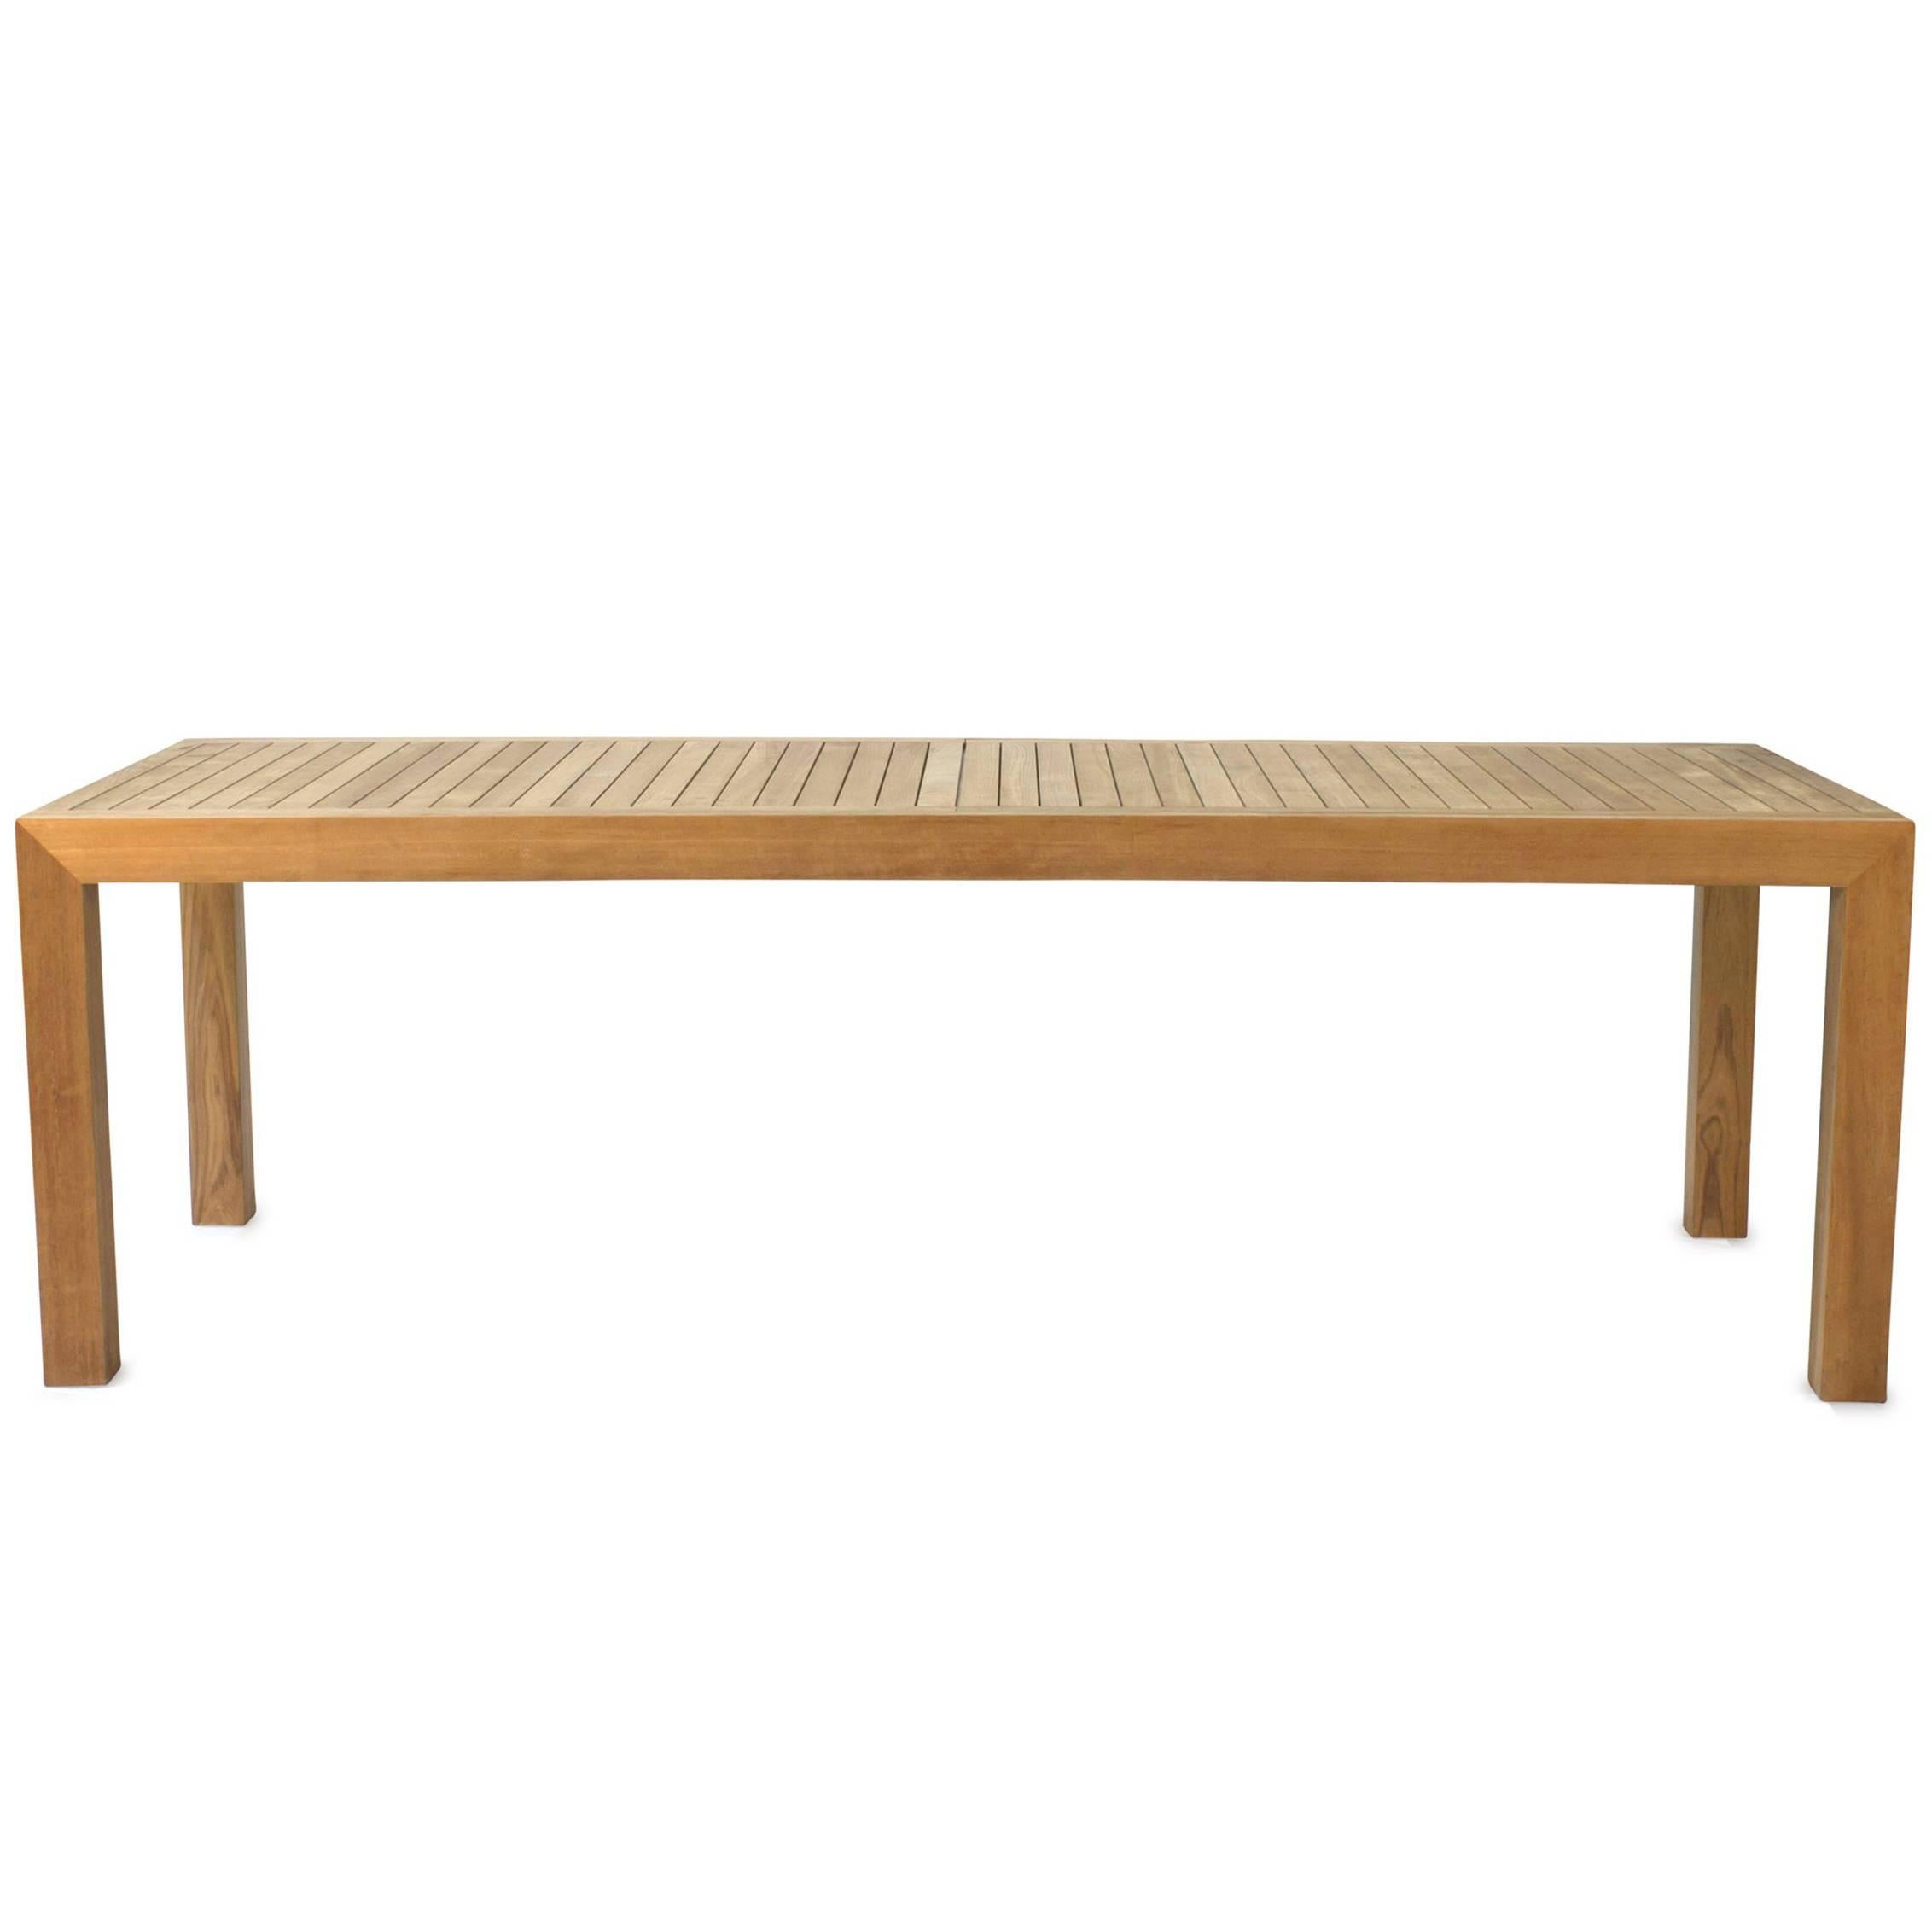 Teak Ixit 360 Outdoor Extending Dining Table by Royal Botania For Sale